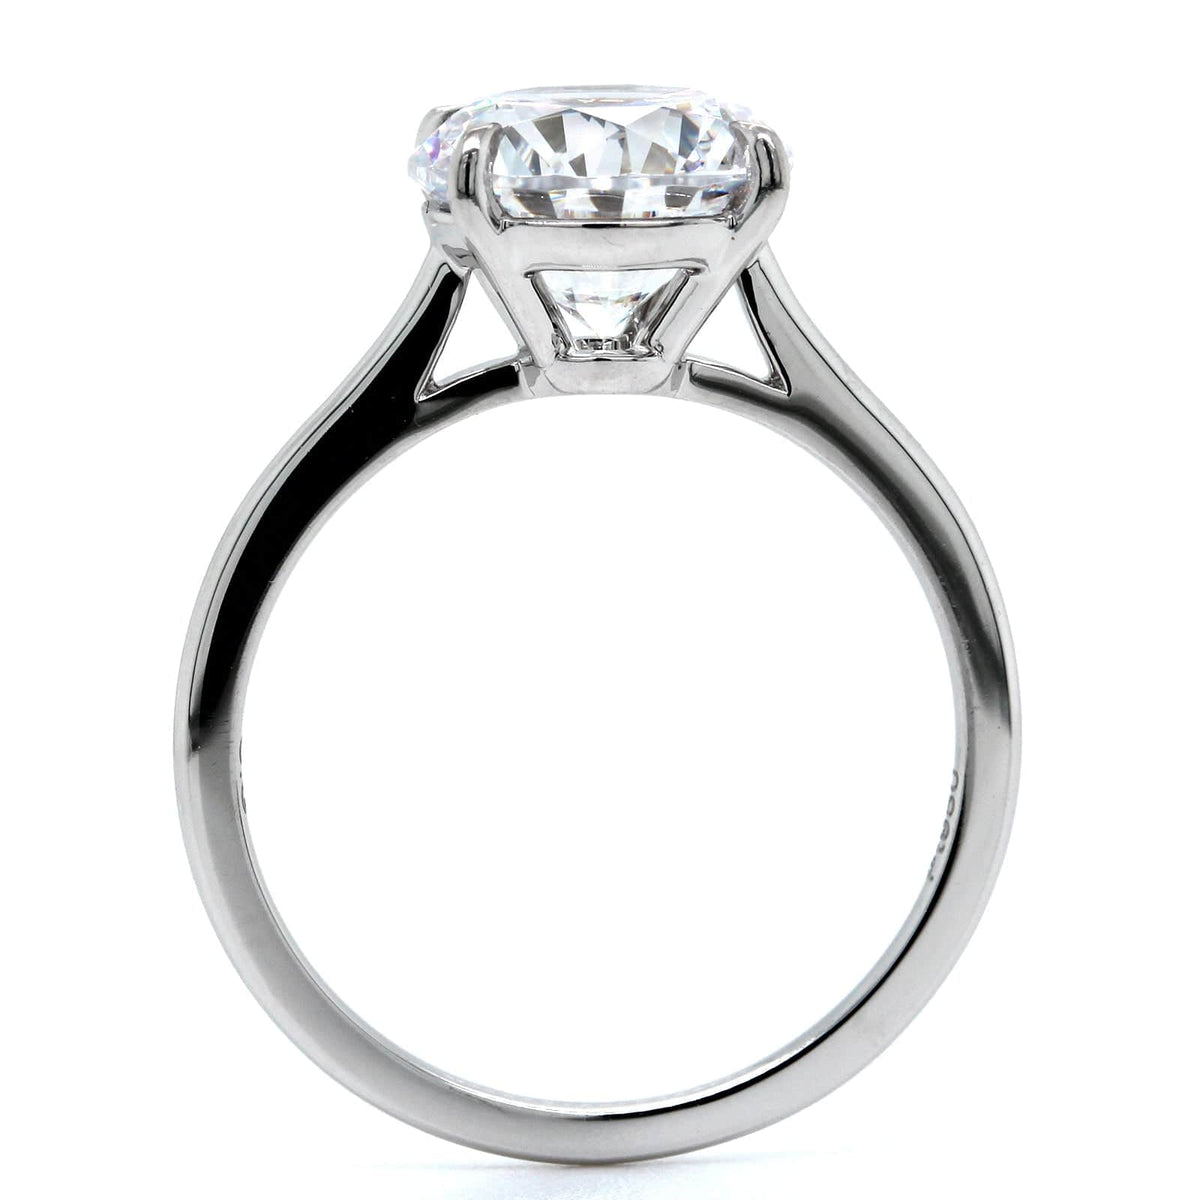 Deal of day yellow gold setting style 2.21 carat radiant cut diamond